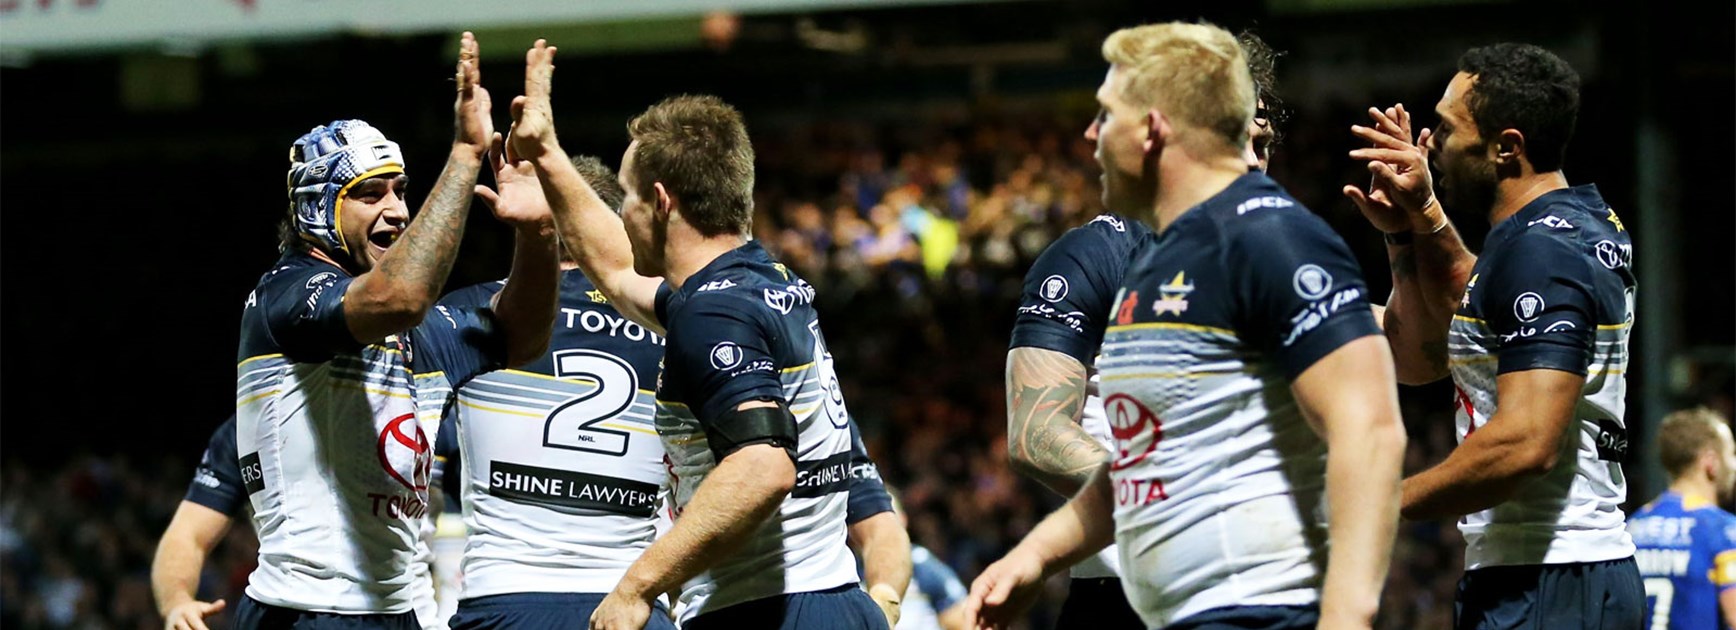 The North Queensland Cowboys ran away with the World Club Challenge in the second half against Leeds.